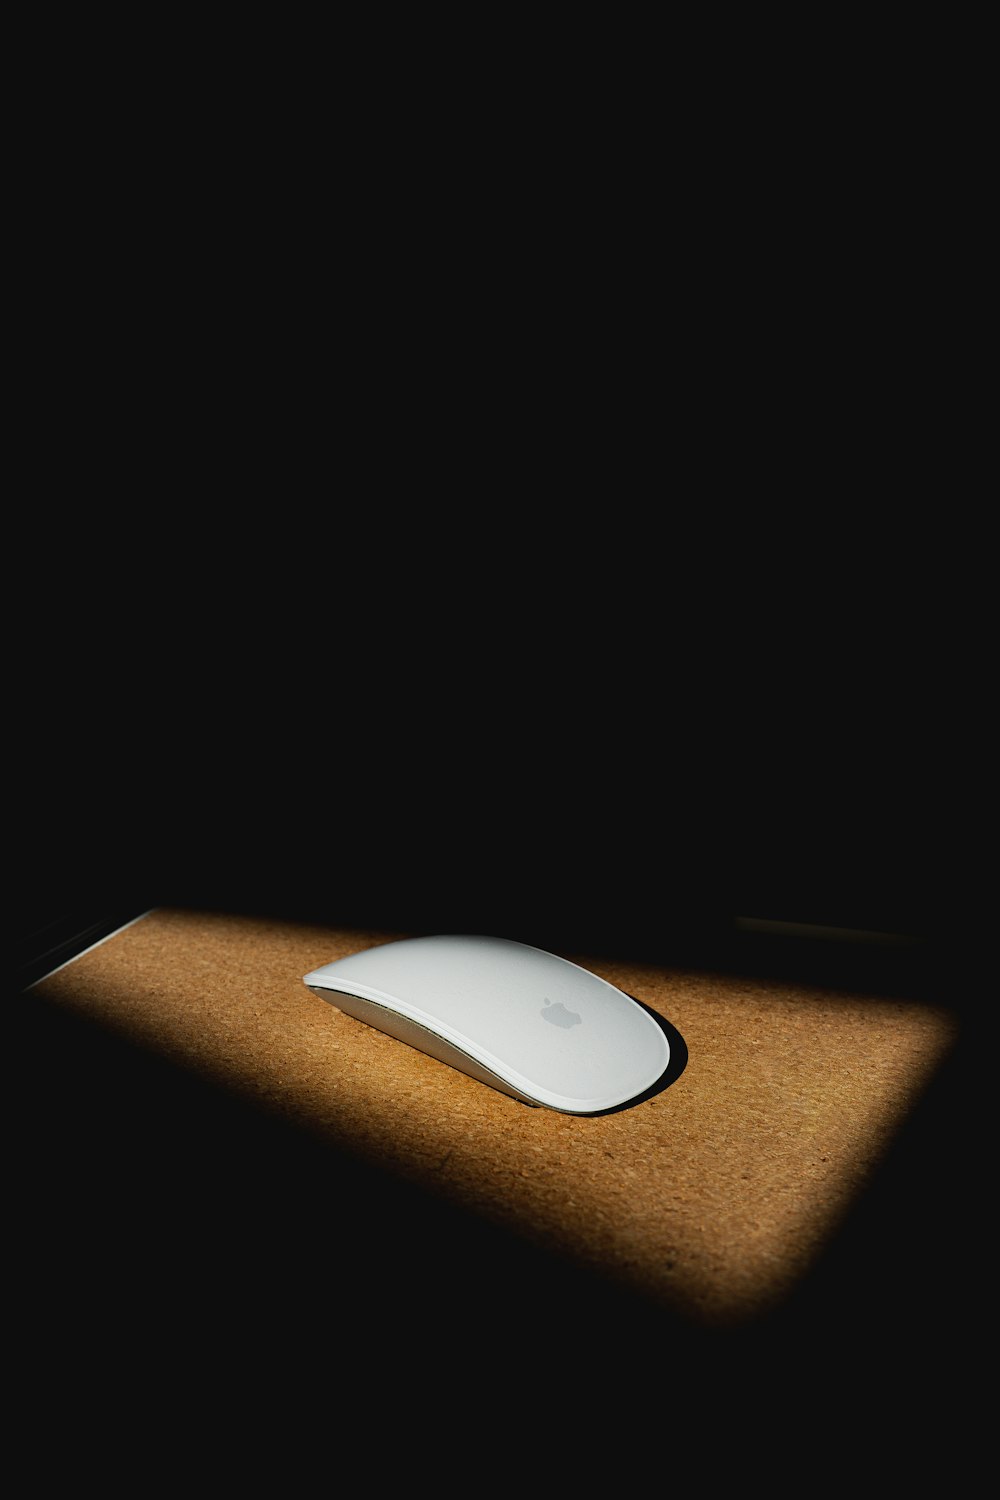 apple magic mouse on brown wooden table